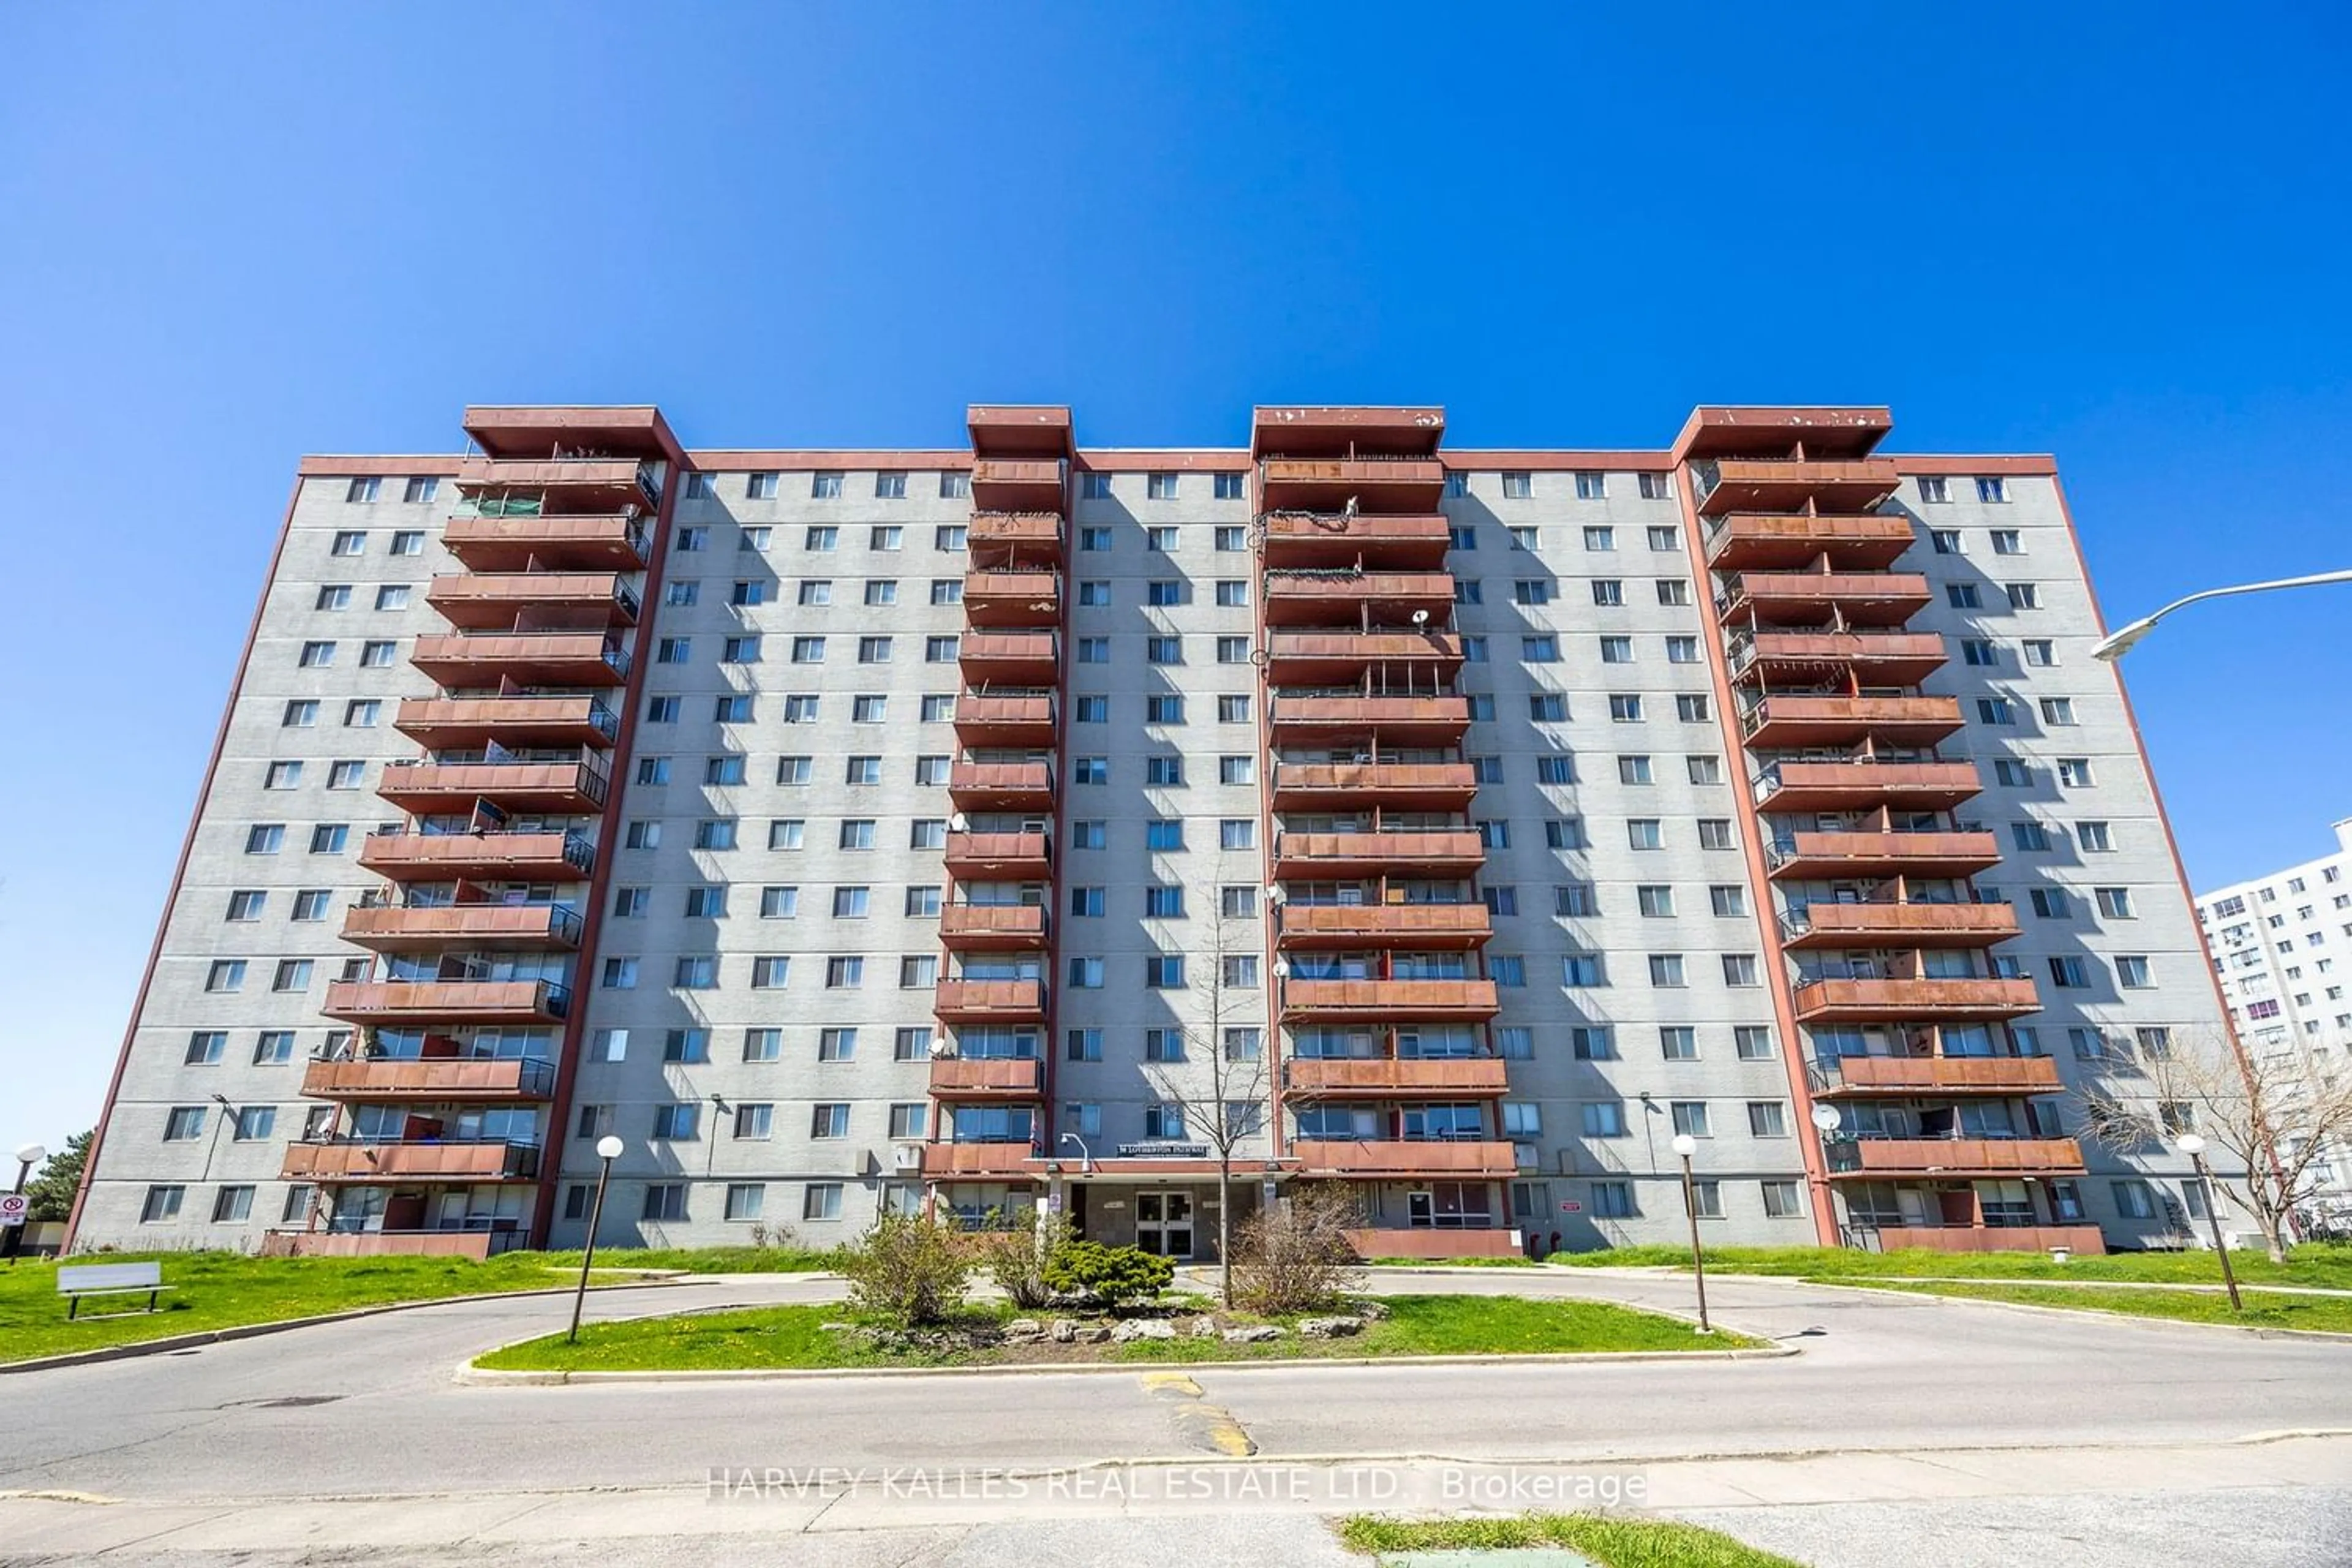 A pic from exterior of the house or condo for 50 Lotherton Ptwy #1202, Toronto Ontario M6B 2G7